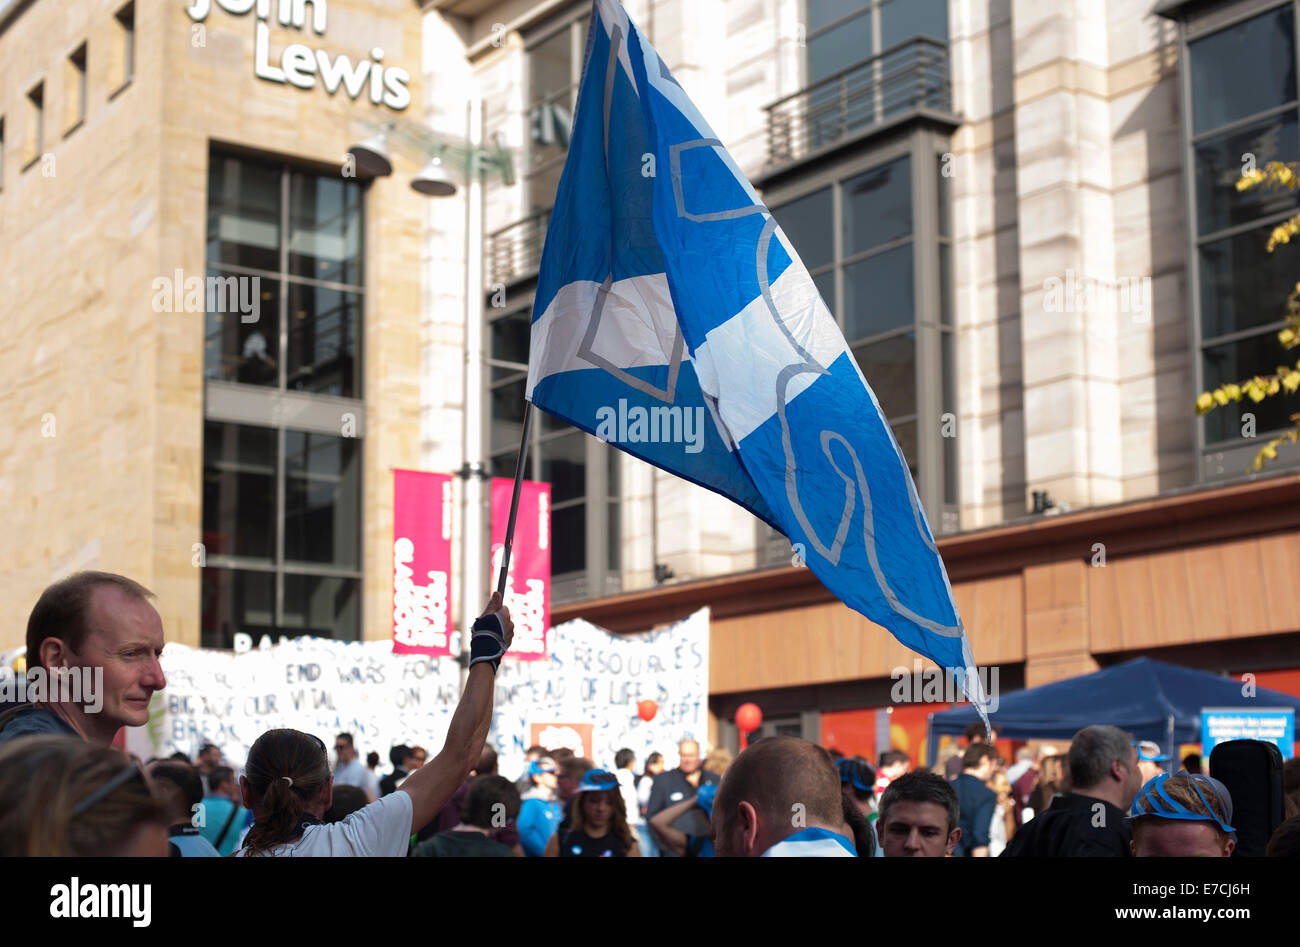 Glasgow, Scotland, UK. 13th September, 2014. A yes supporter campaigning and flying a st andrews cross flag during the lead up to the Scottish independence referendum on Buchanan Street, Glasgow, Scotland on Saturday 13th September 2014 Credit:  Iona Shepherd/Alamy Live News Stock Photo